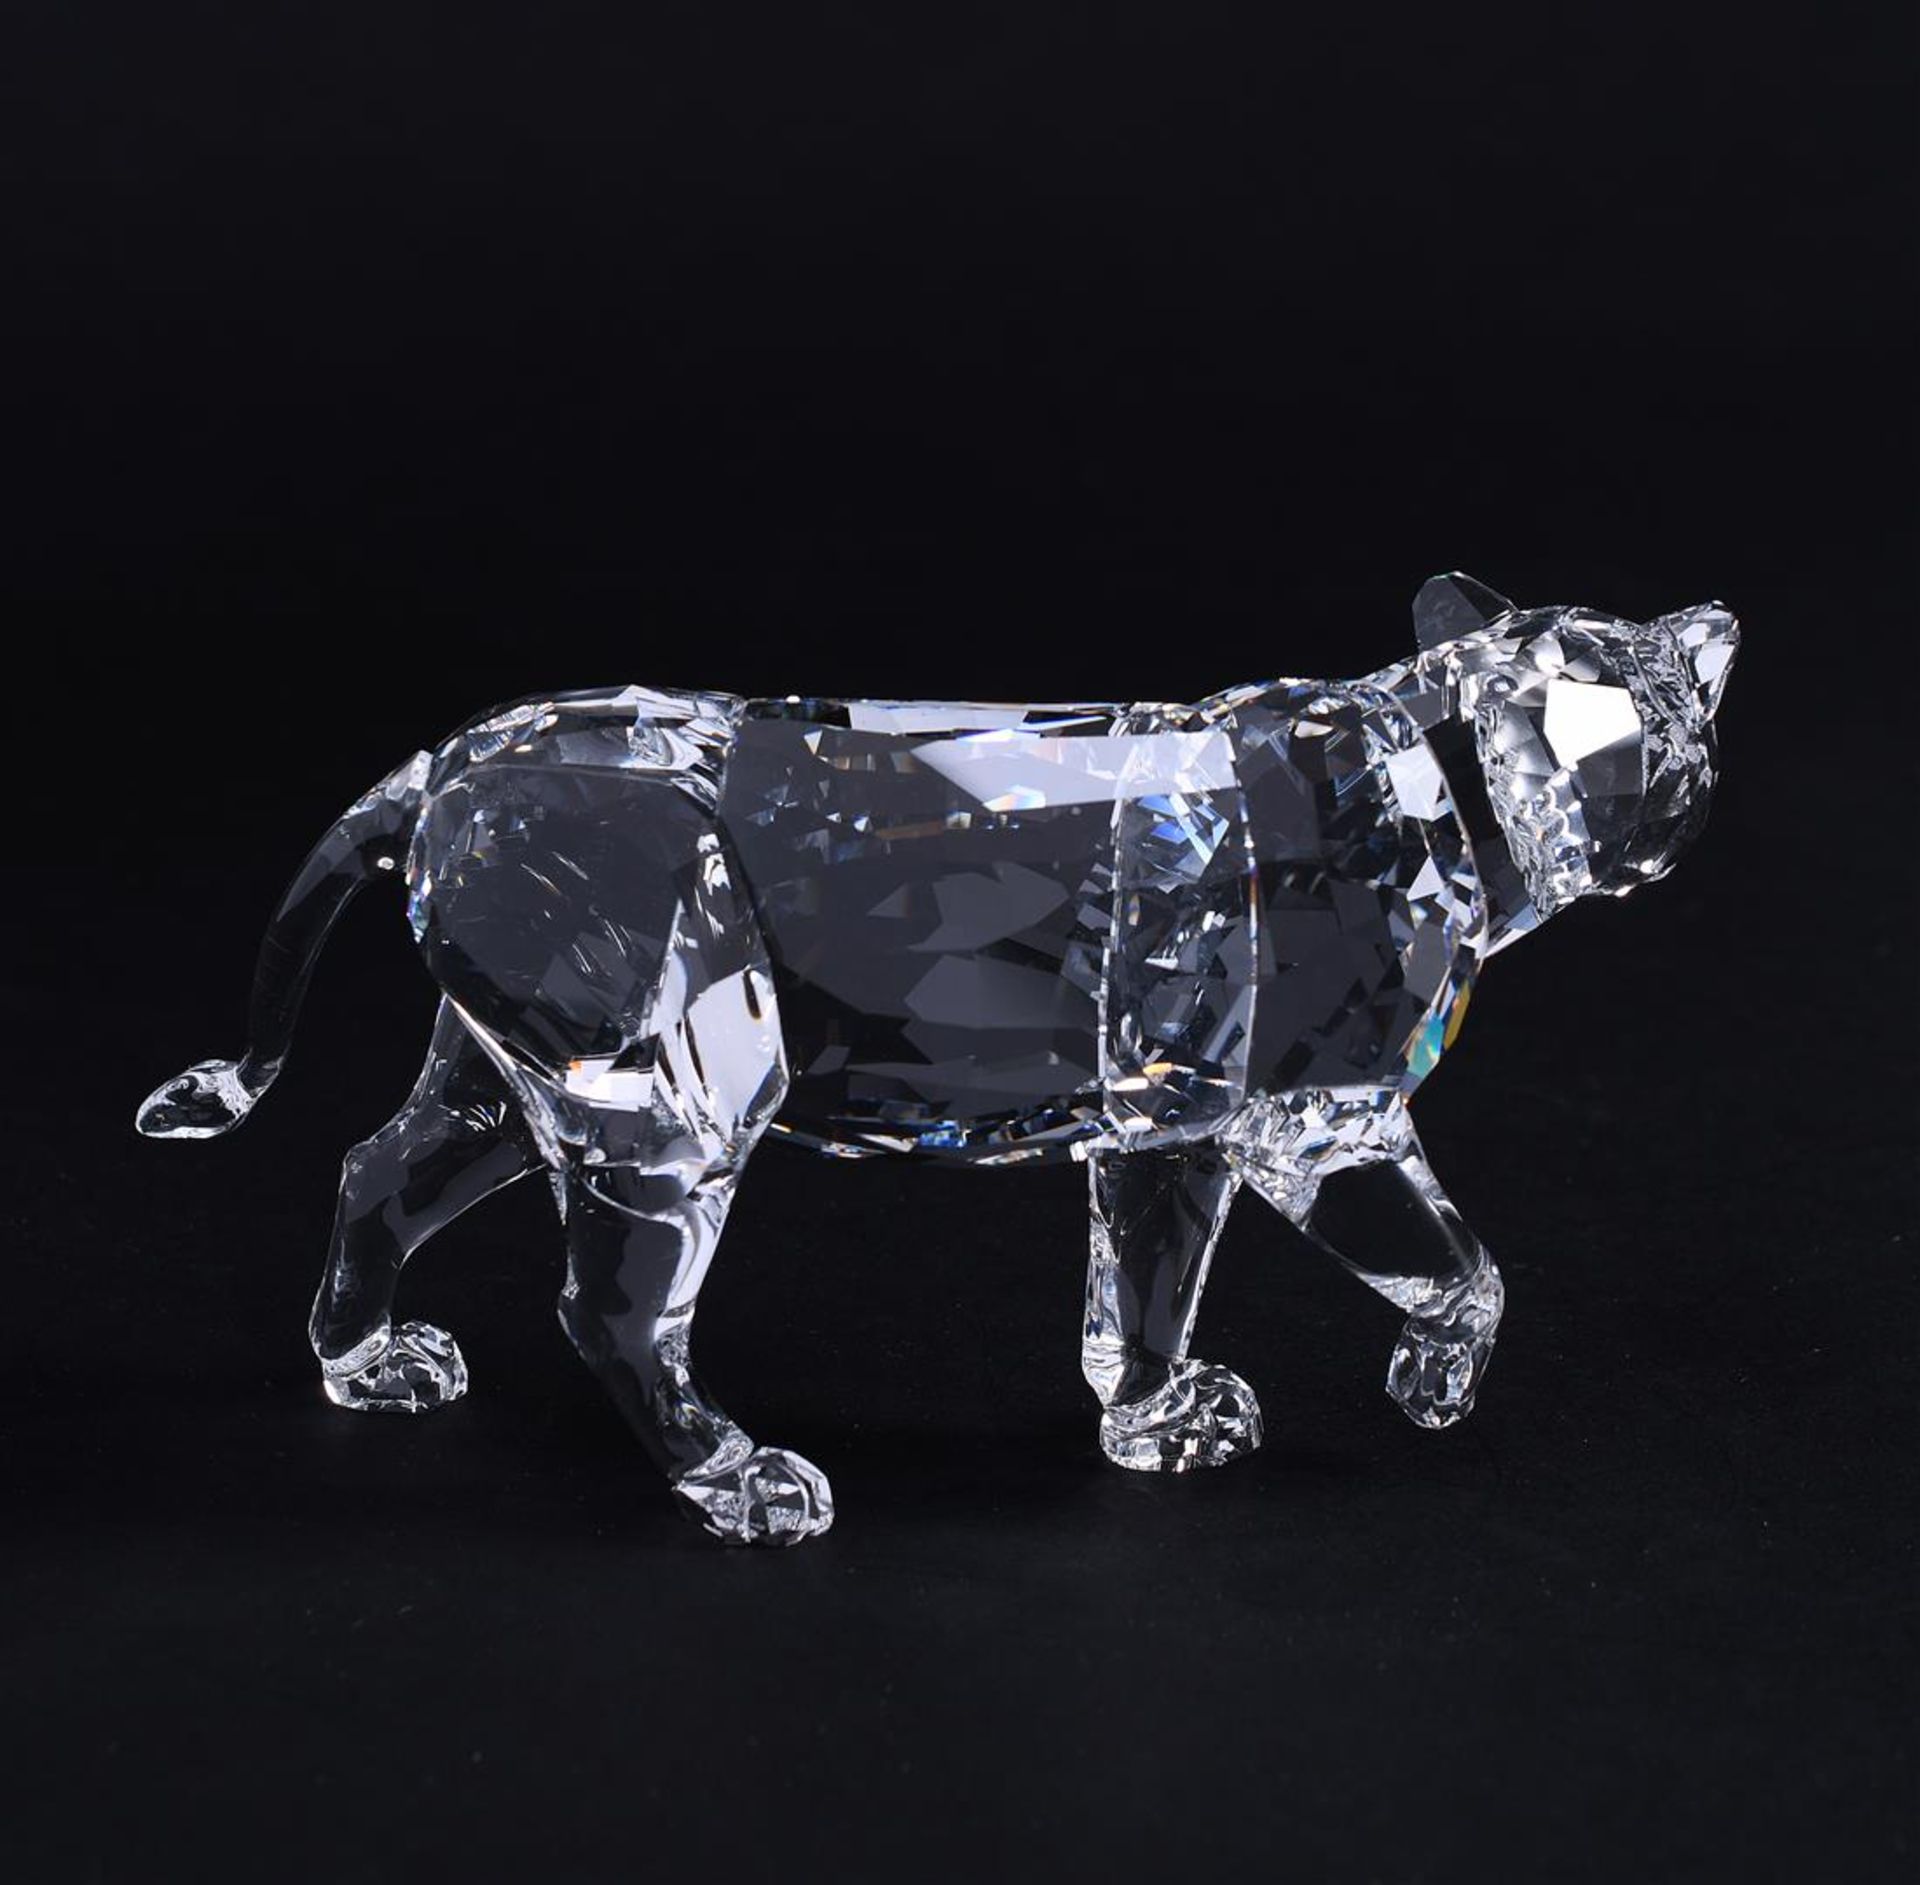 Swarovski, mother lion, year of issue 2013, 1194085. Includes original box.
15,2 x 7,9 cm. - Image 3 of 5